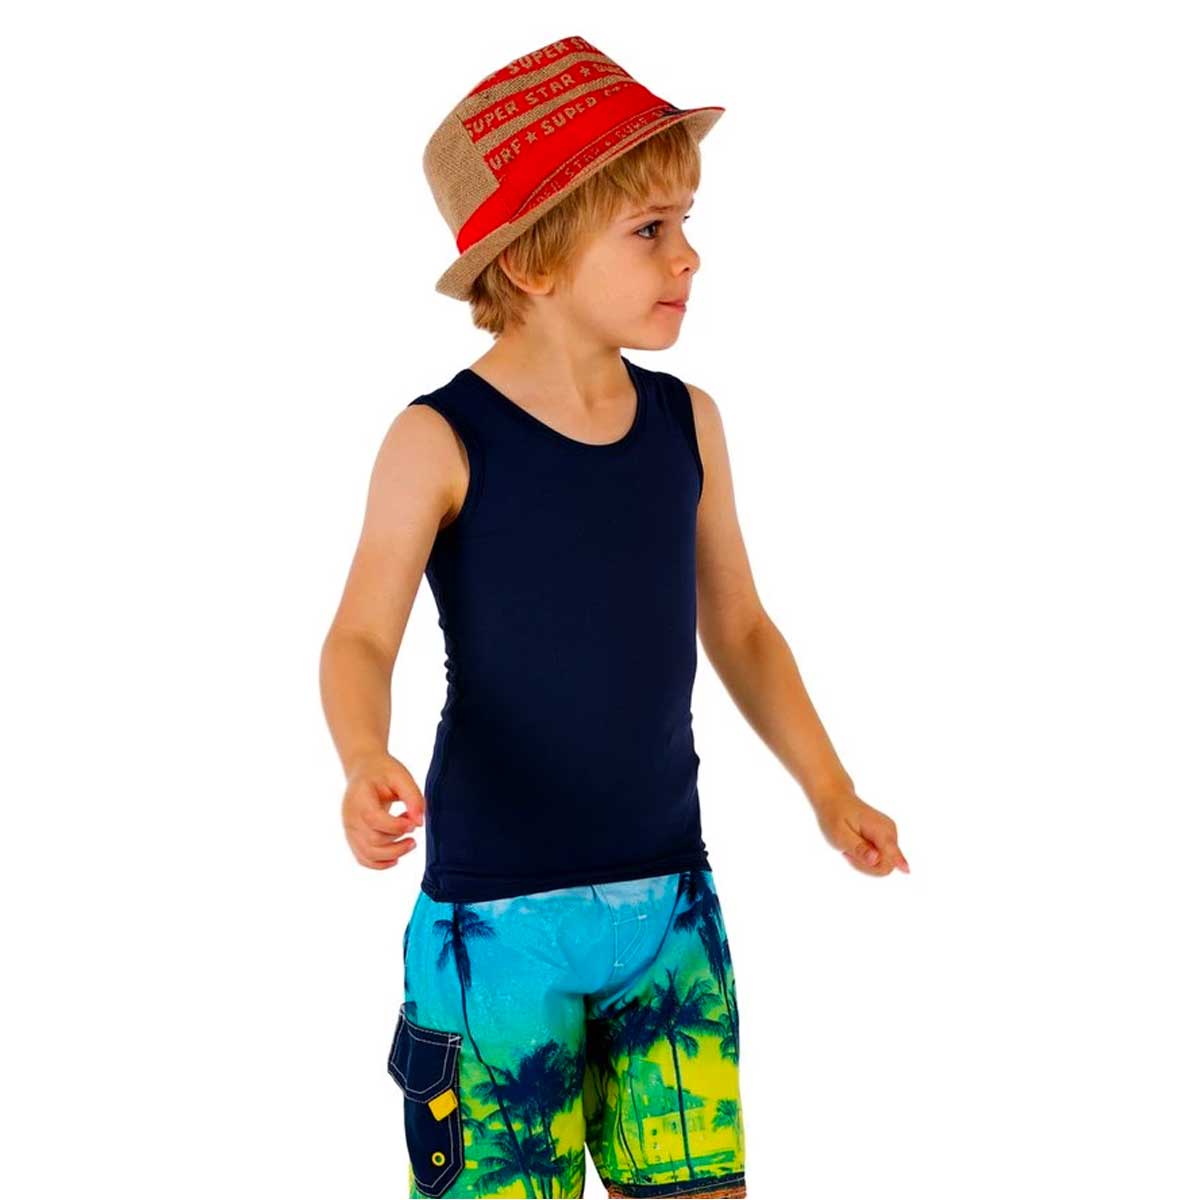 JettProof Sensory Undervest Boys JettProof undervests can be worn as clothing or undergarments